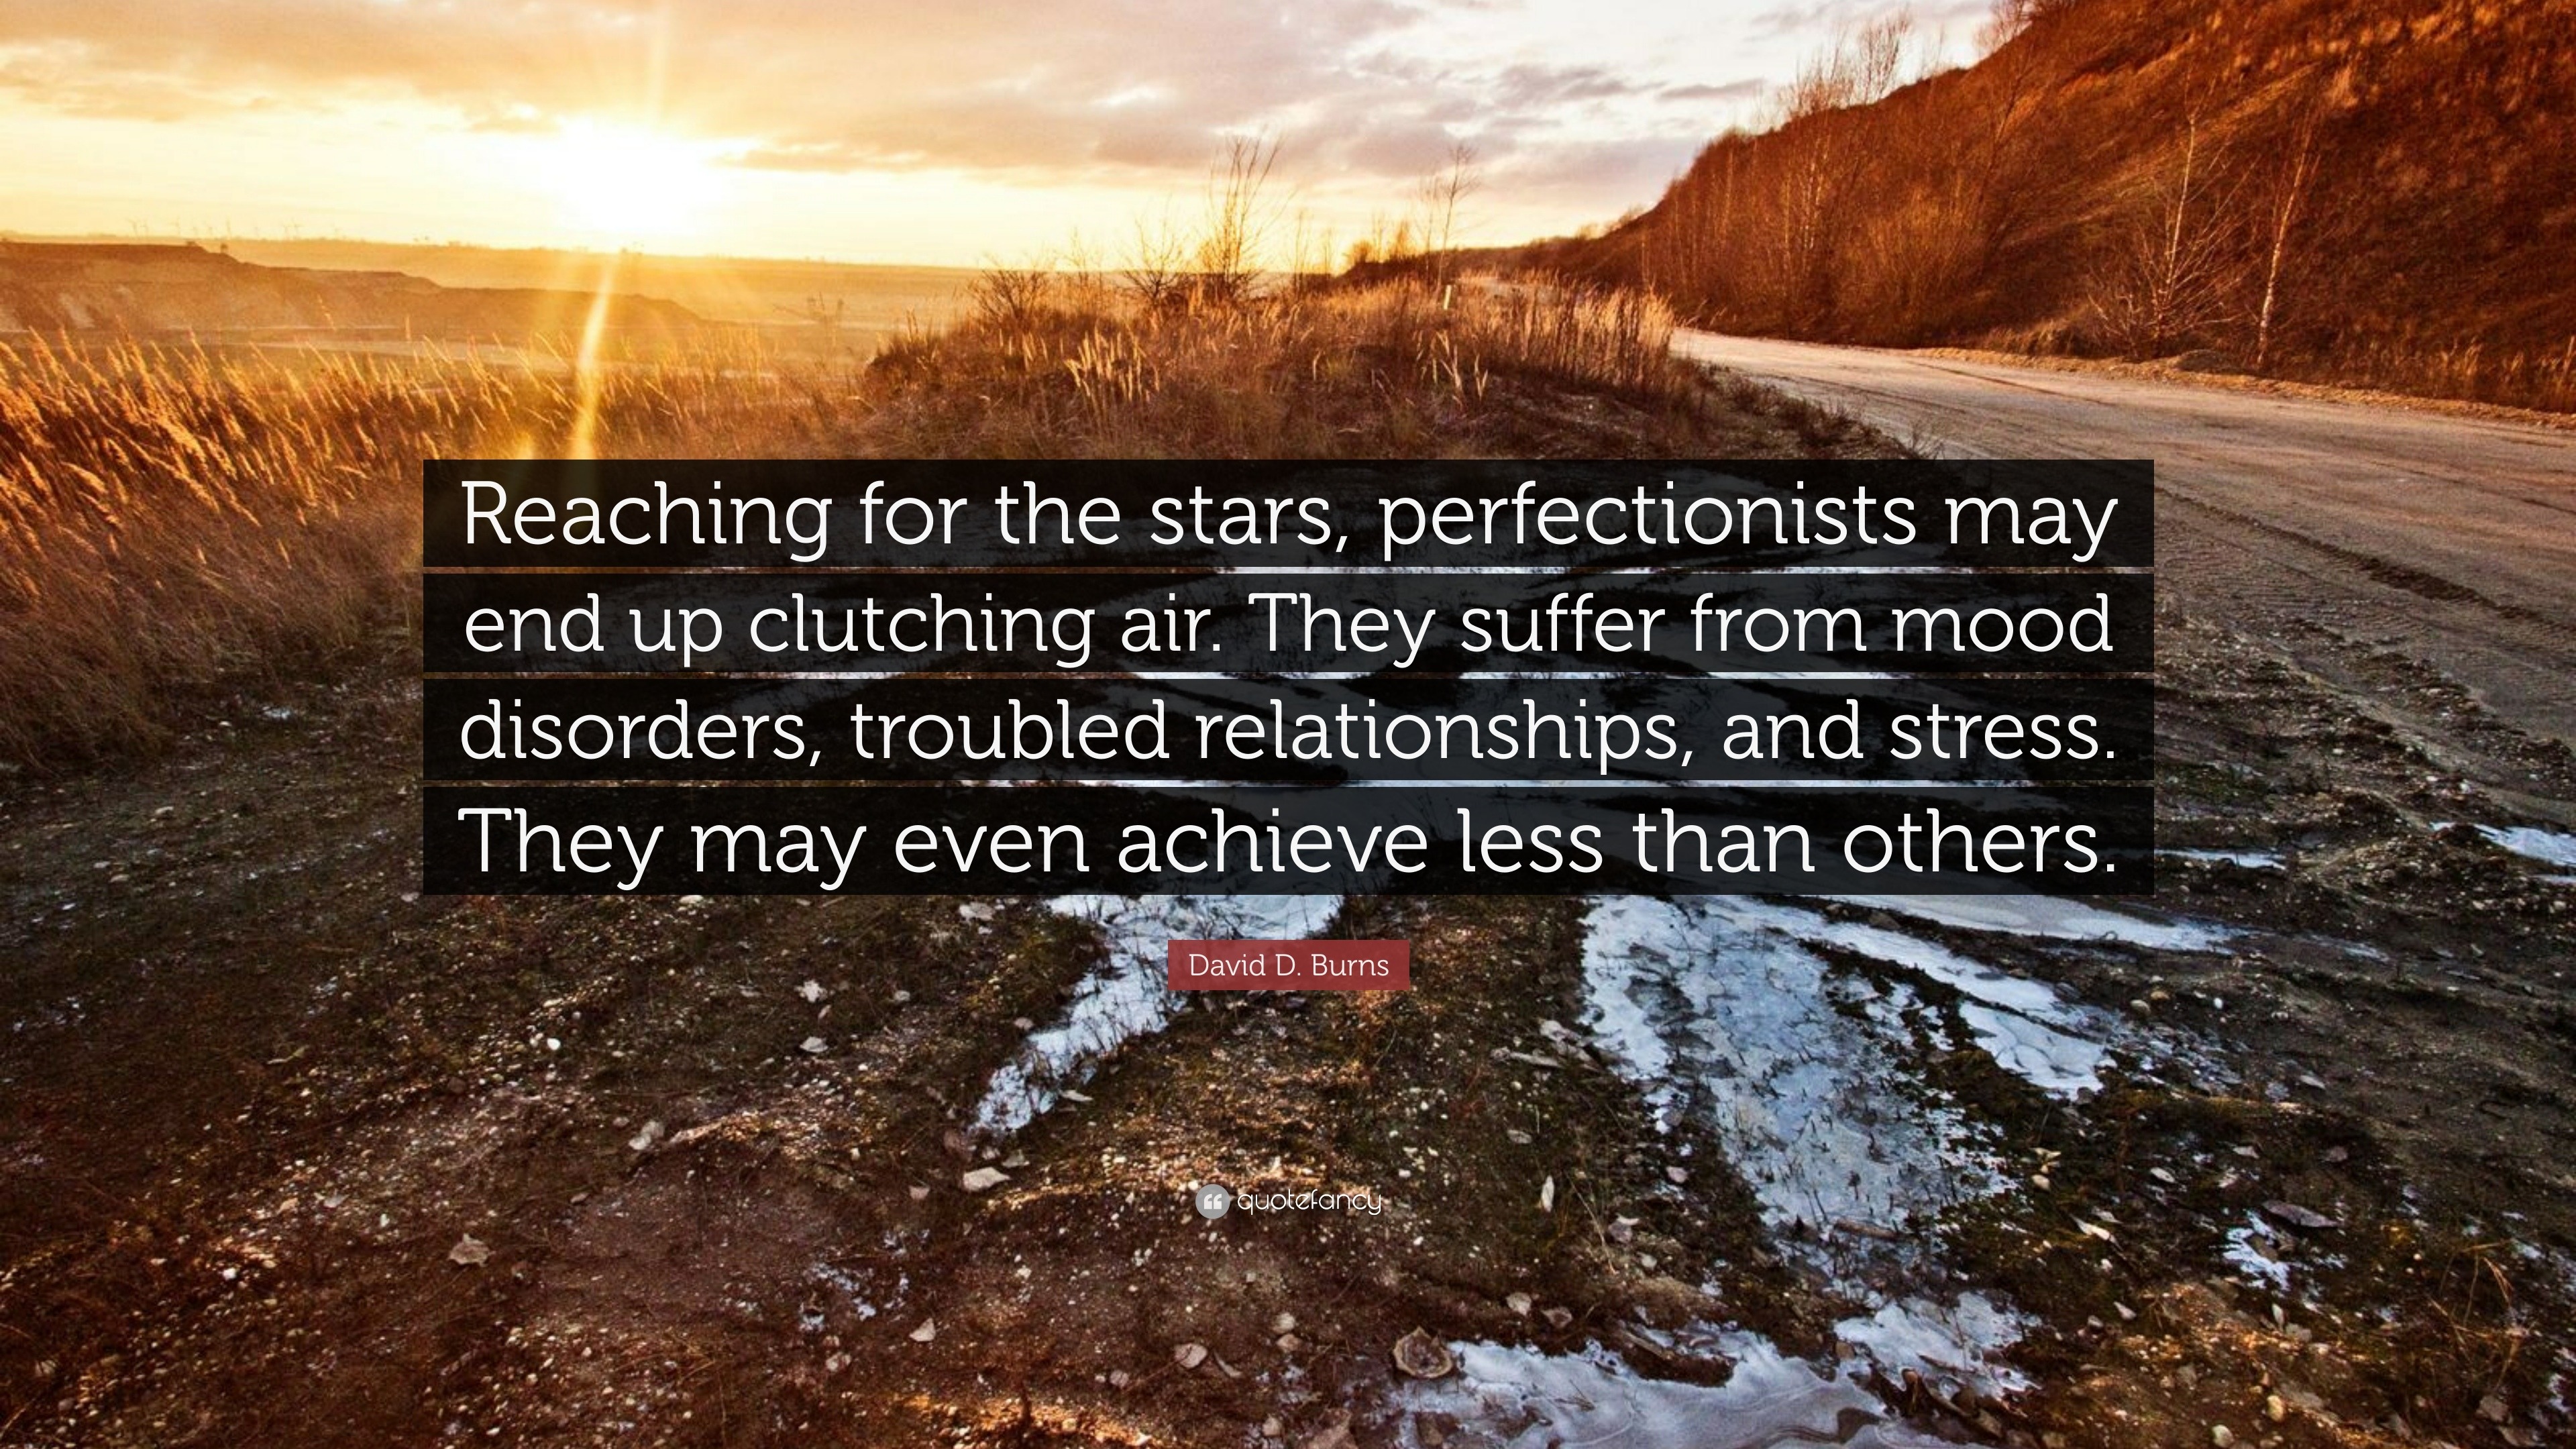 David D Burns Quote Reaching For The Stars Perfectionists May End Up Clutching Air They Suffer From Mood Disorders Troubled Relationships